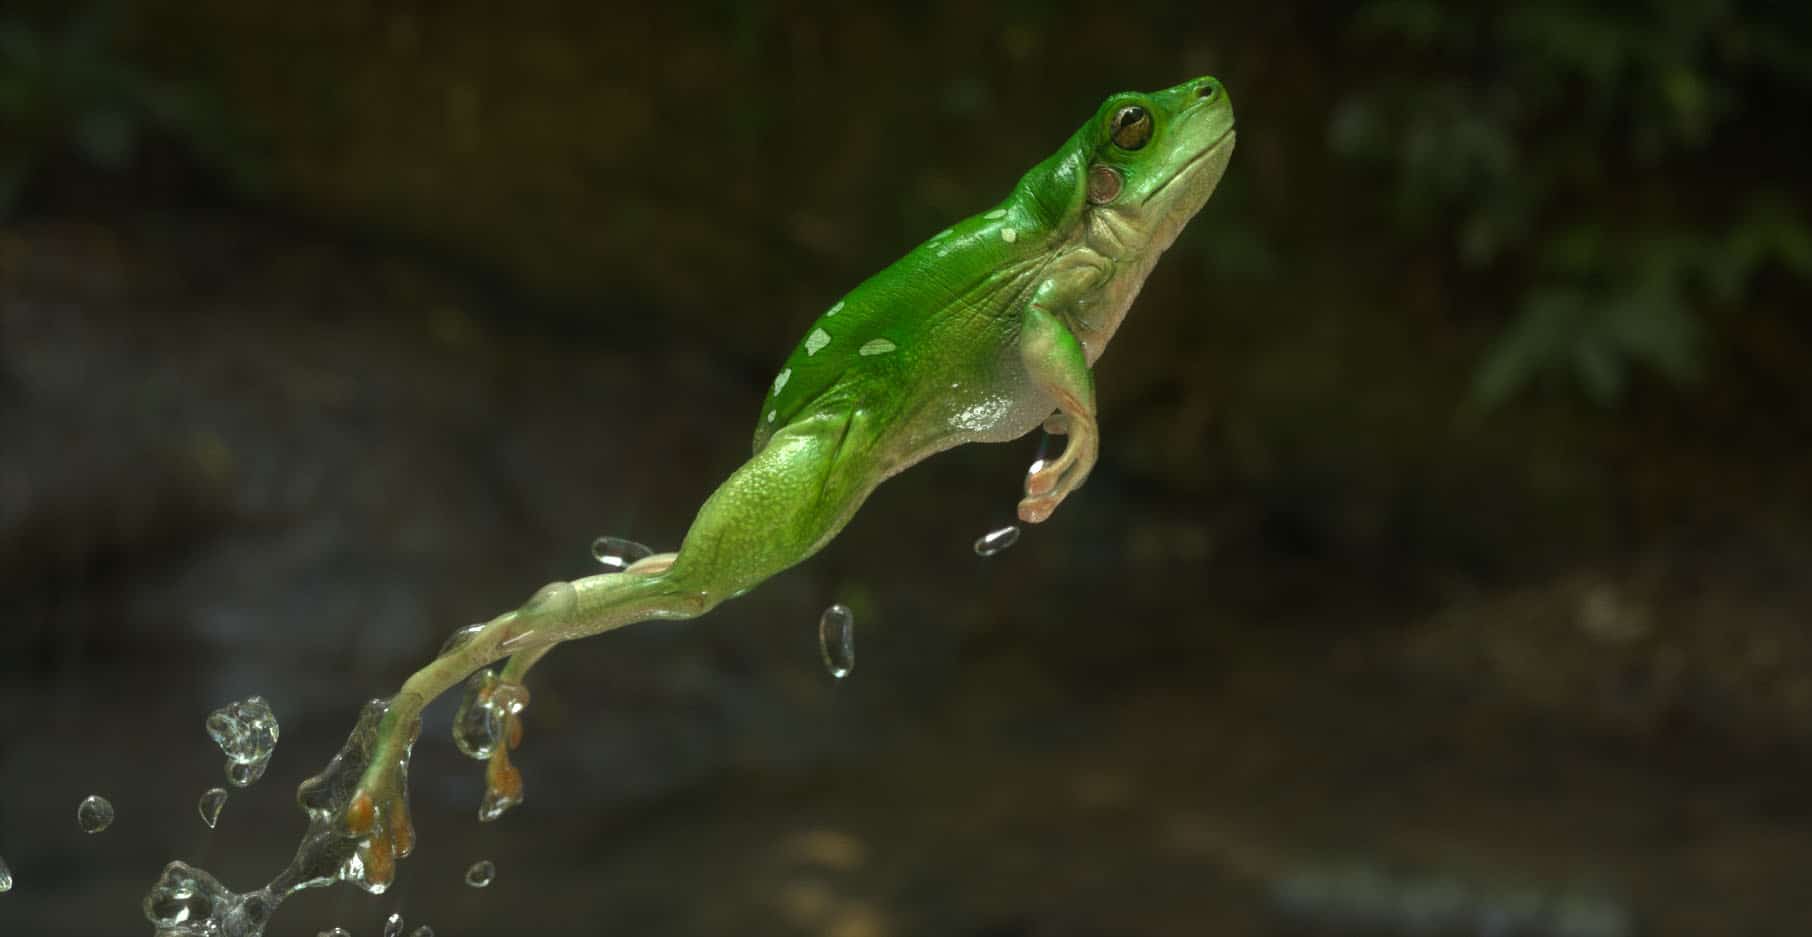 Frogs can jump and leap